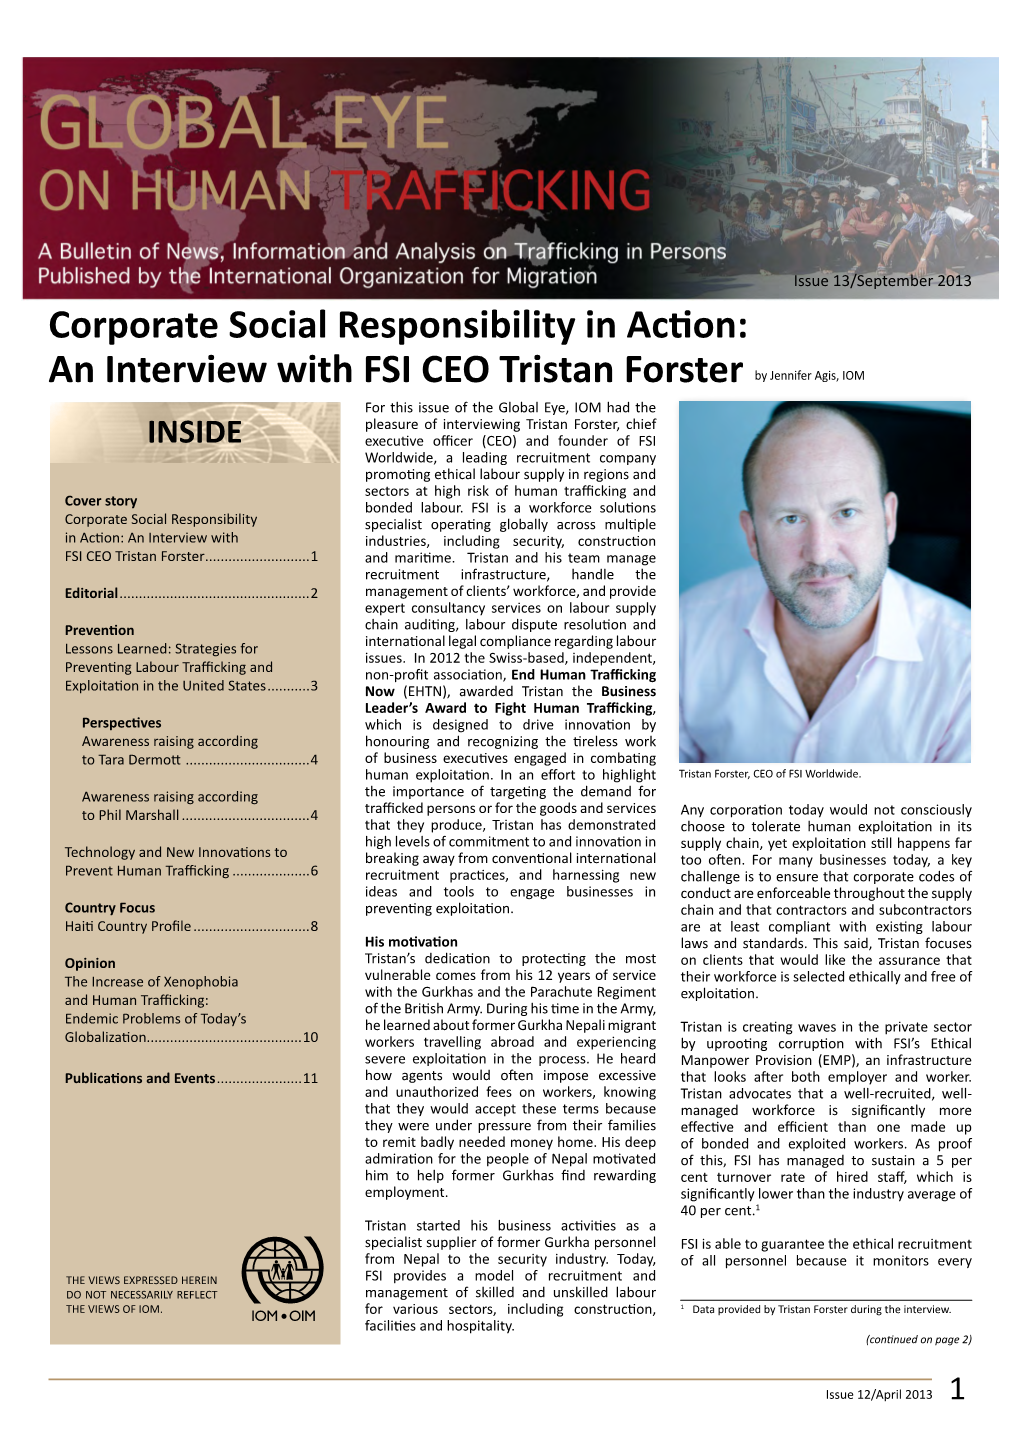 An Interview with FSI CEO Tristan Forster